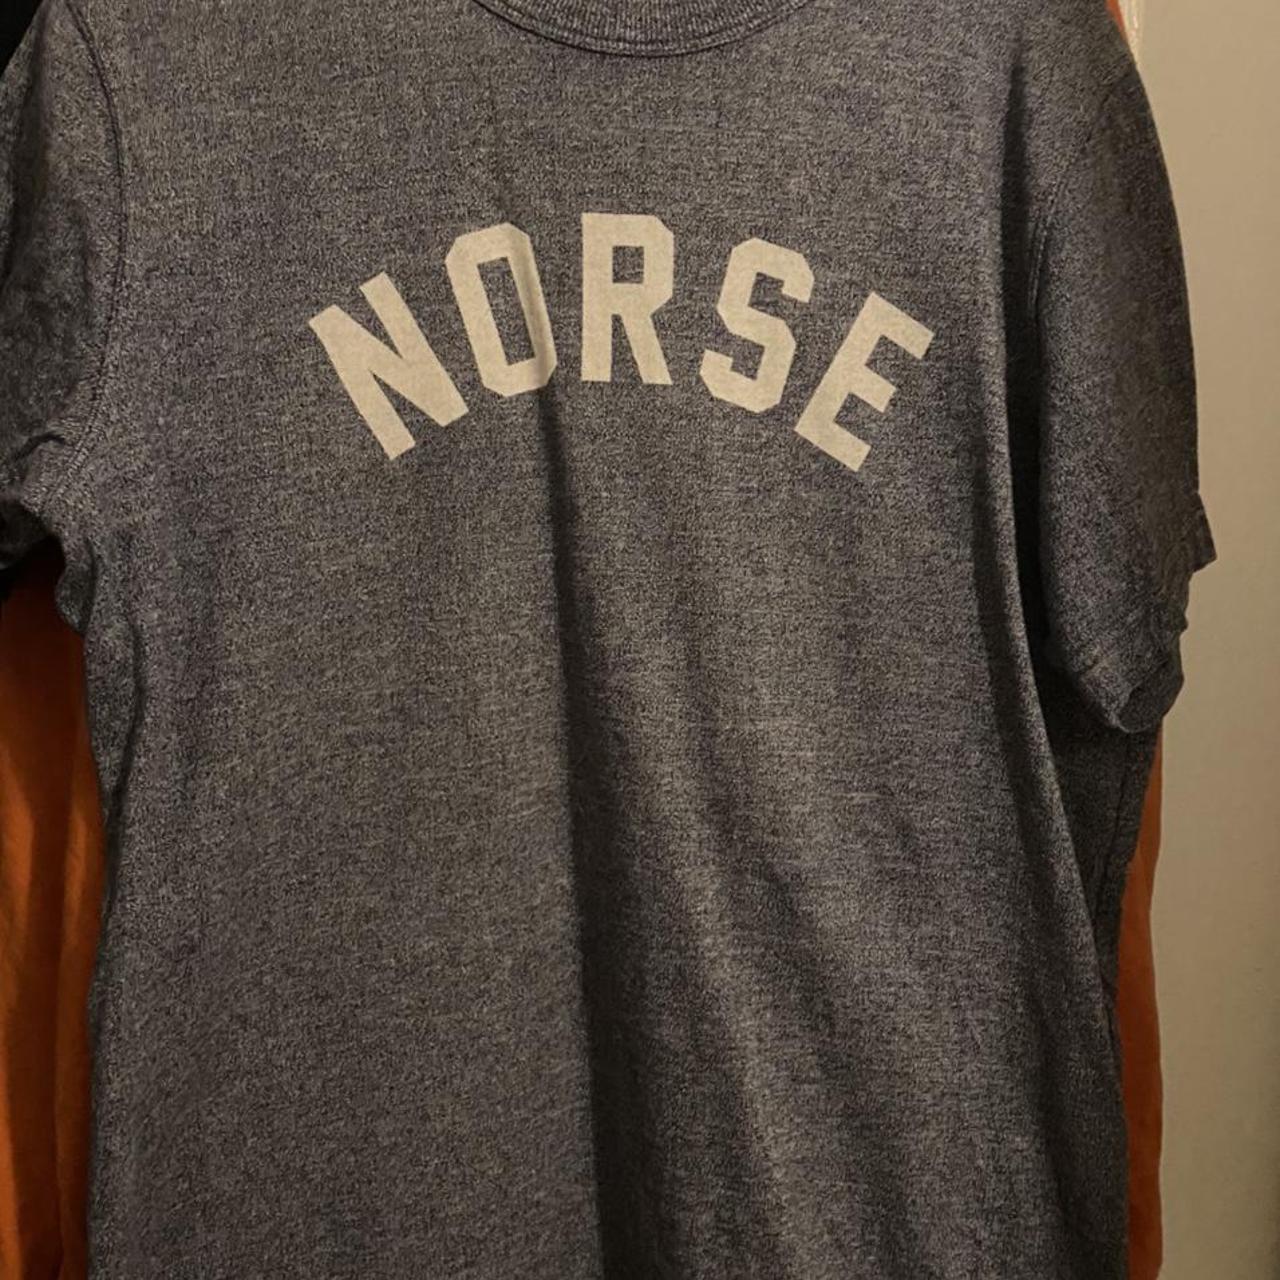 Product Image 1 - Norse Projects Tee
Size Medium
Condition Used